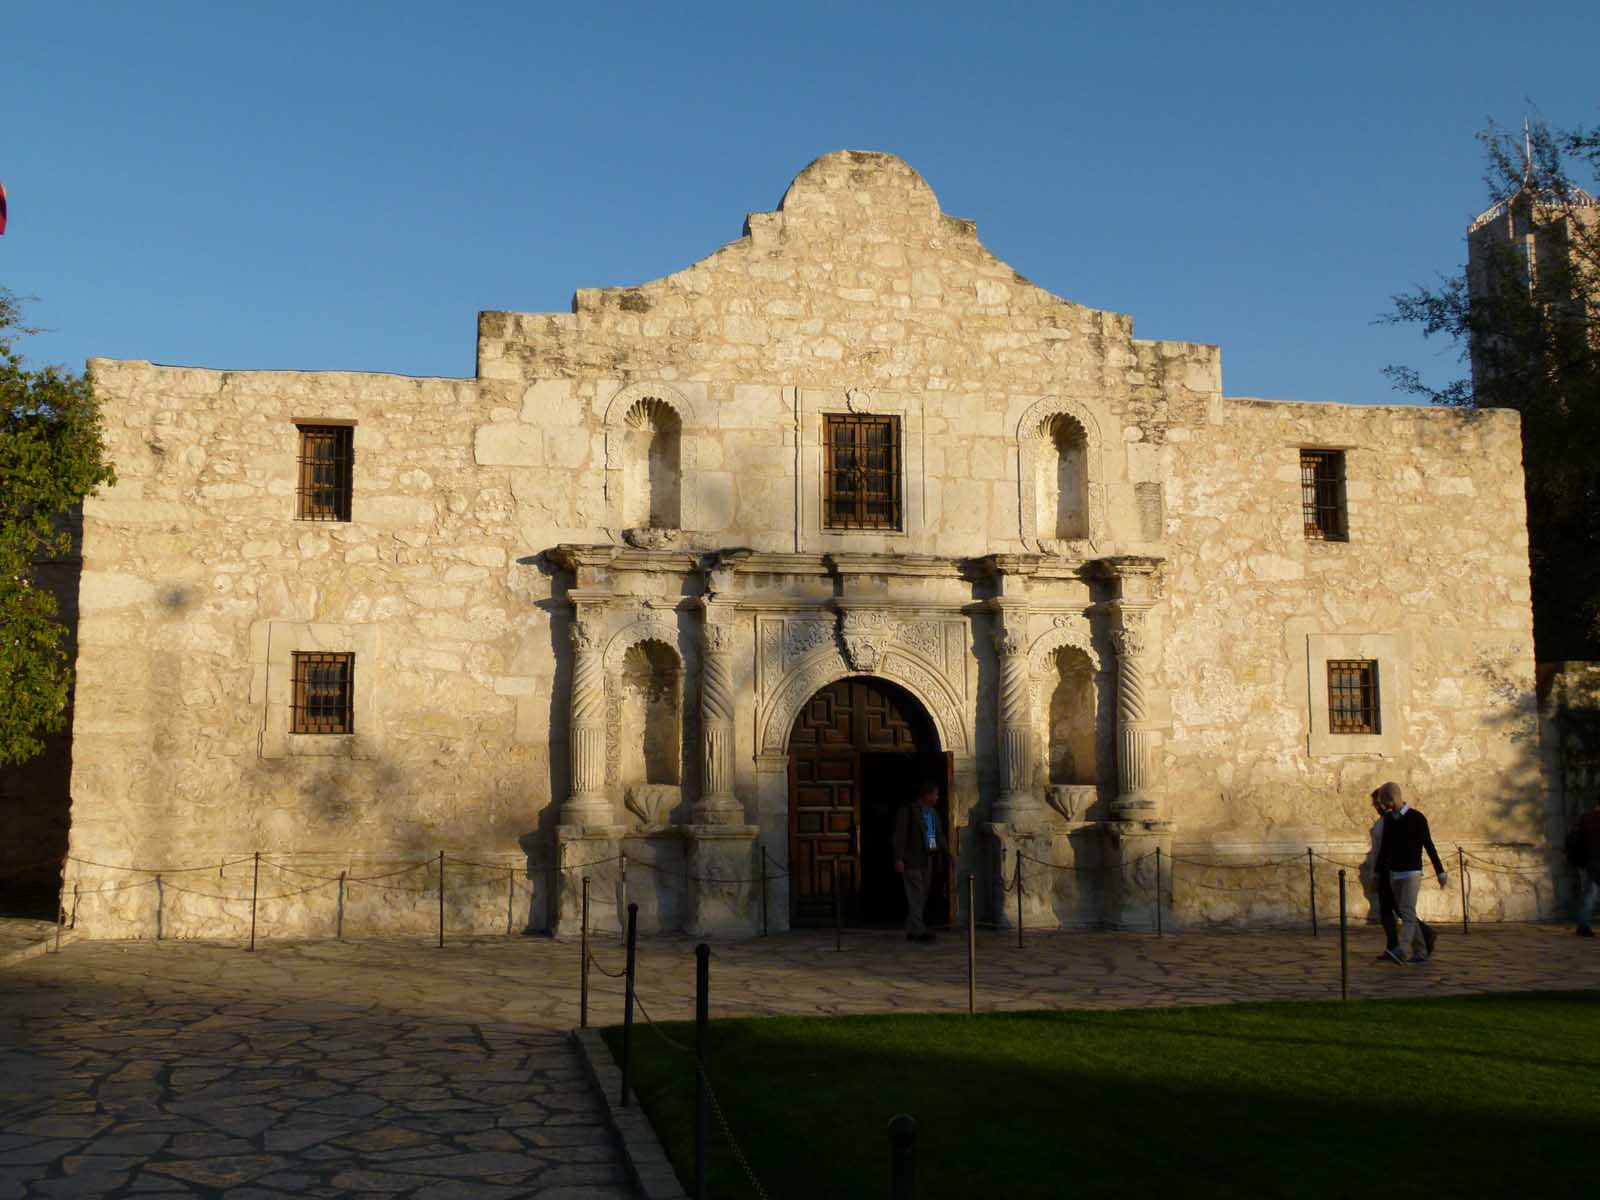 Facts about Texas The Alamo